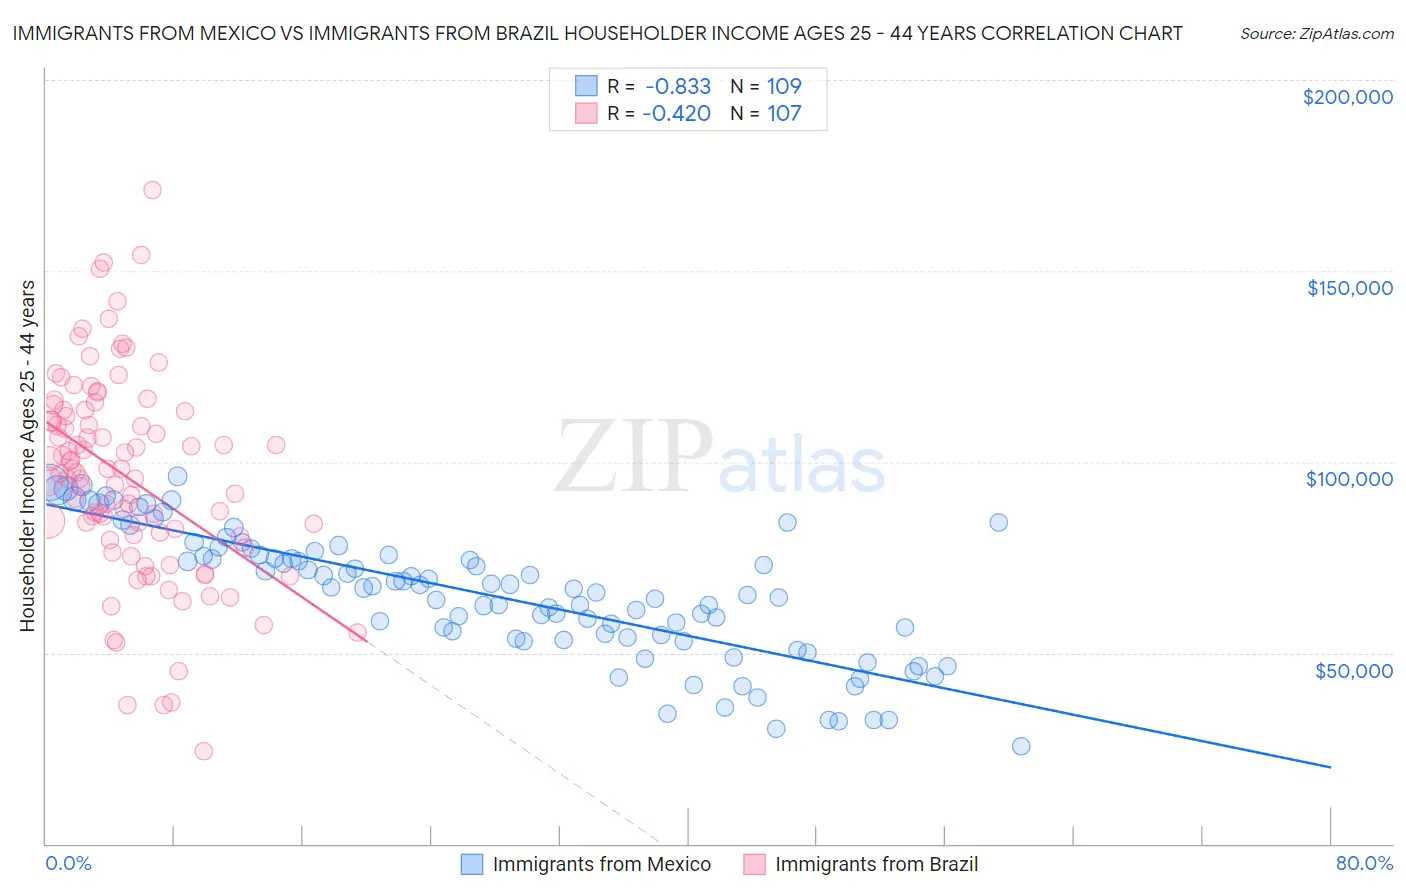 Immigrants from Mexico vs Immigrants from Brazil Householder Income Ages 25 - 44 years